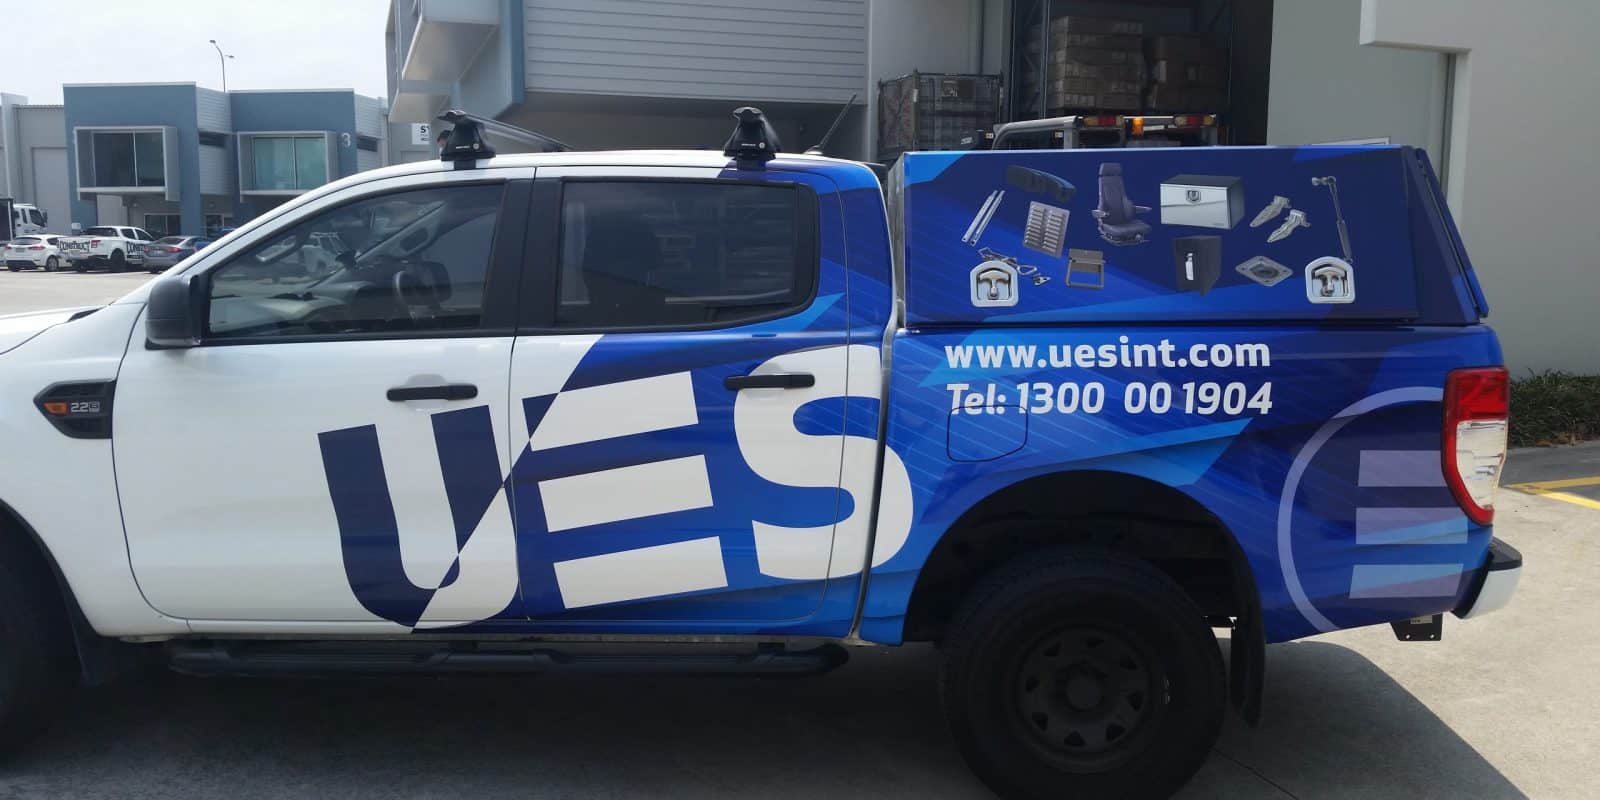 Vehicle signage services available Sydney wide